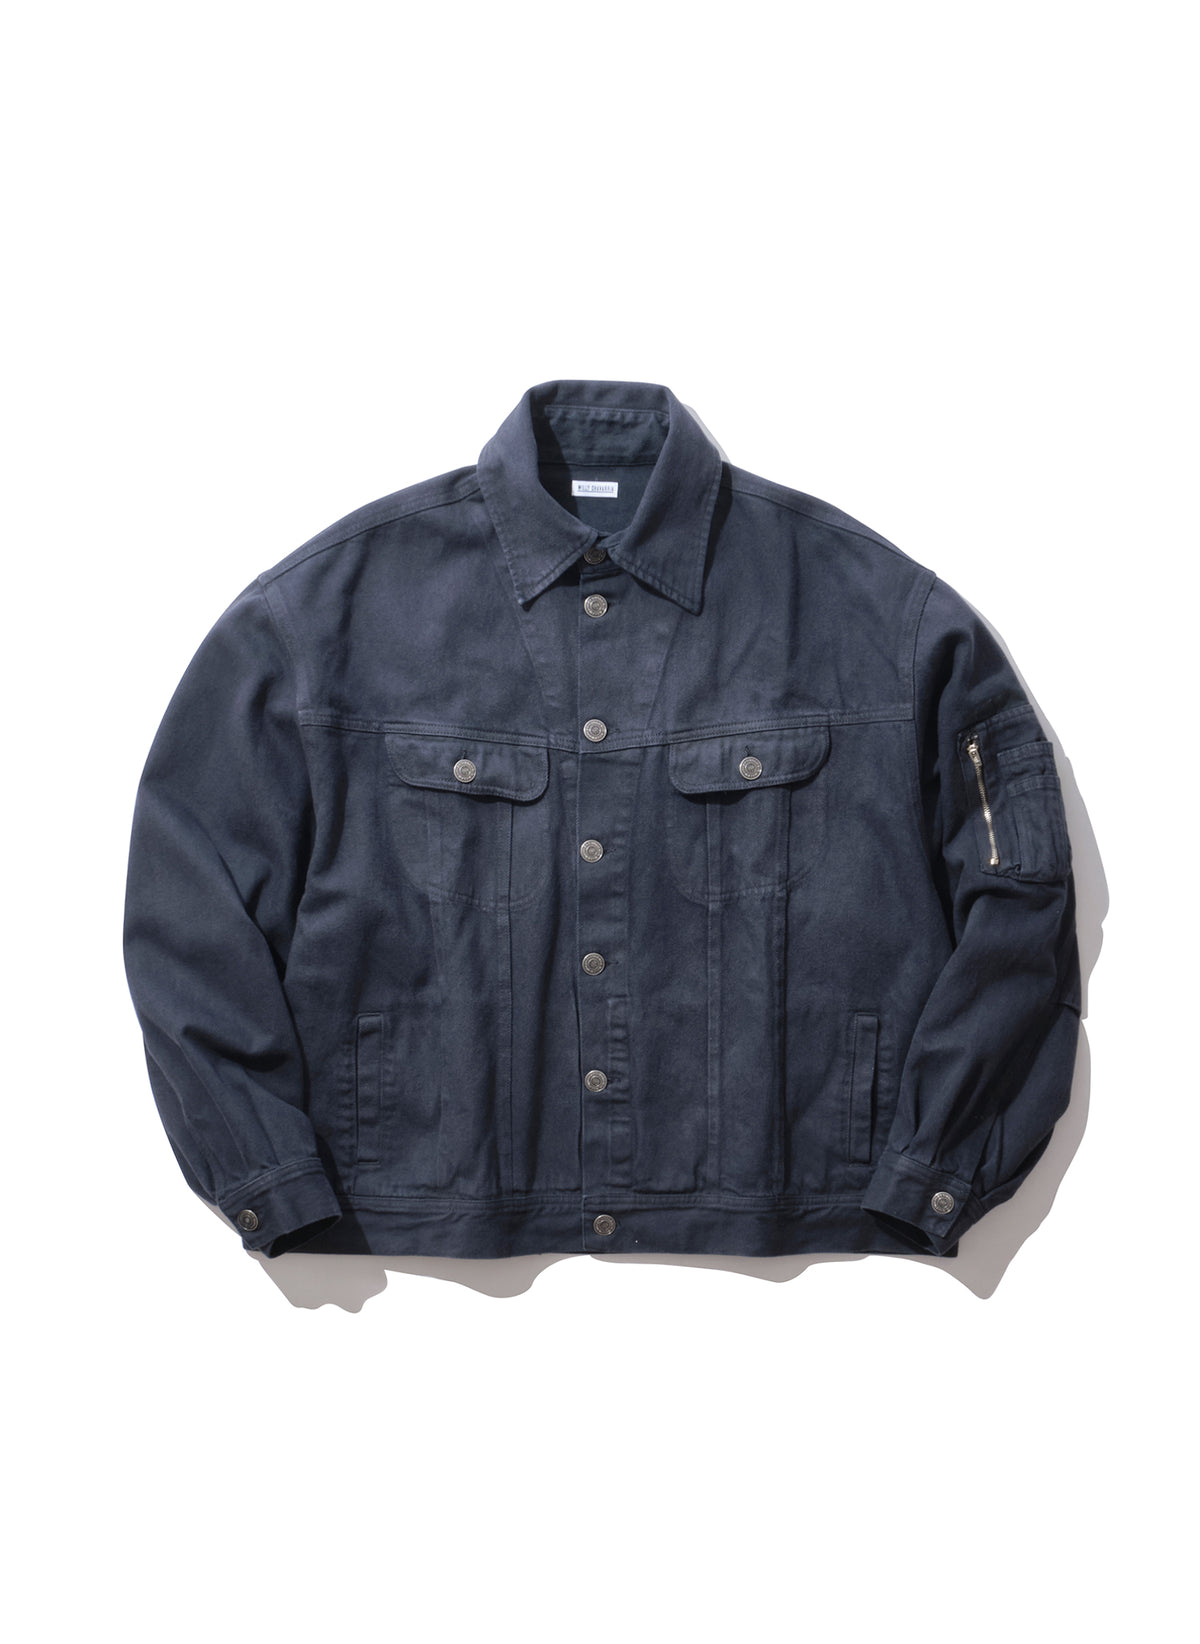 【RESTOCK】 WILLY CHAVARRIA / CHACHI TRUCKER CIGARETTE POCKET JACKET CHEMICAL WASH BLACK